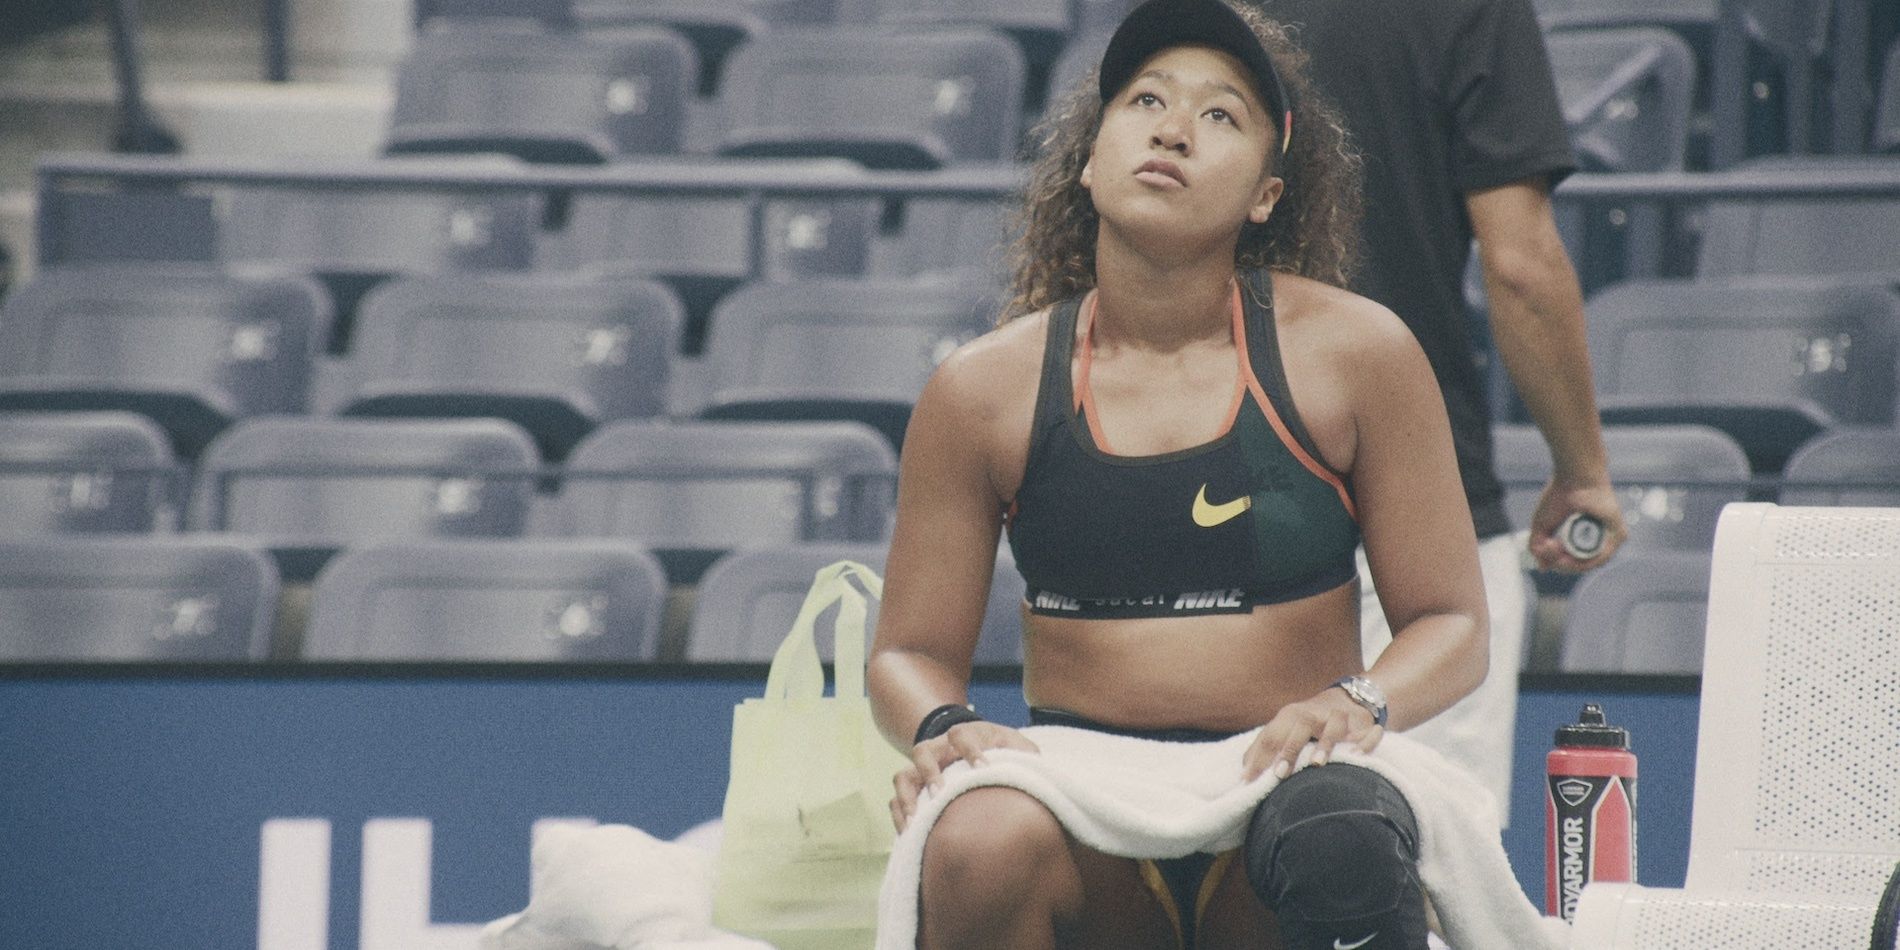 Naomi Osaka takes a rest during a training session in her docuseries